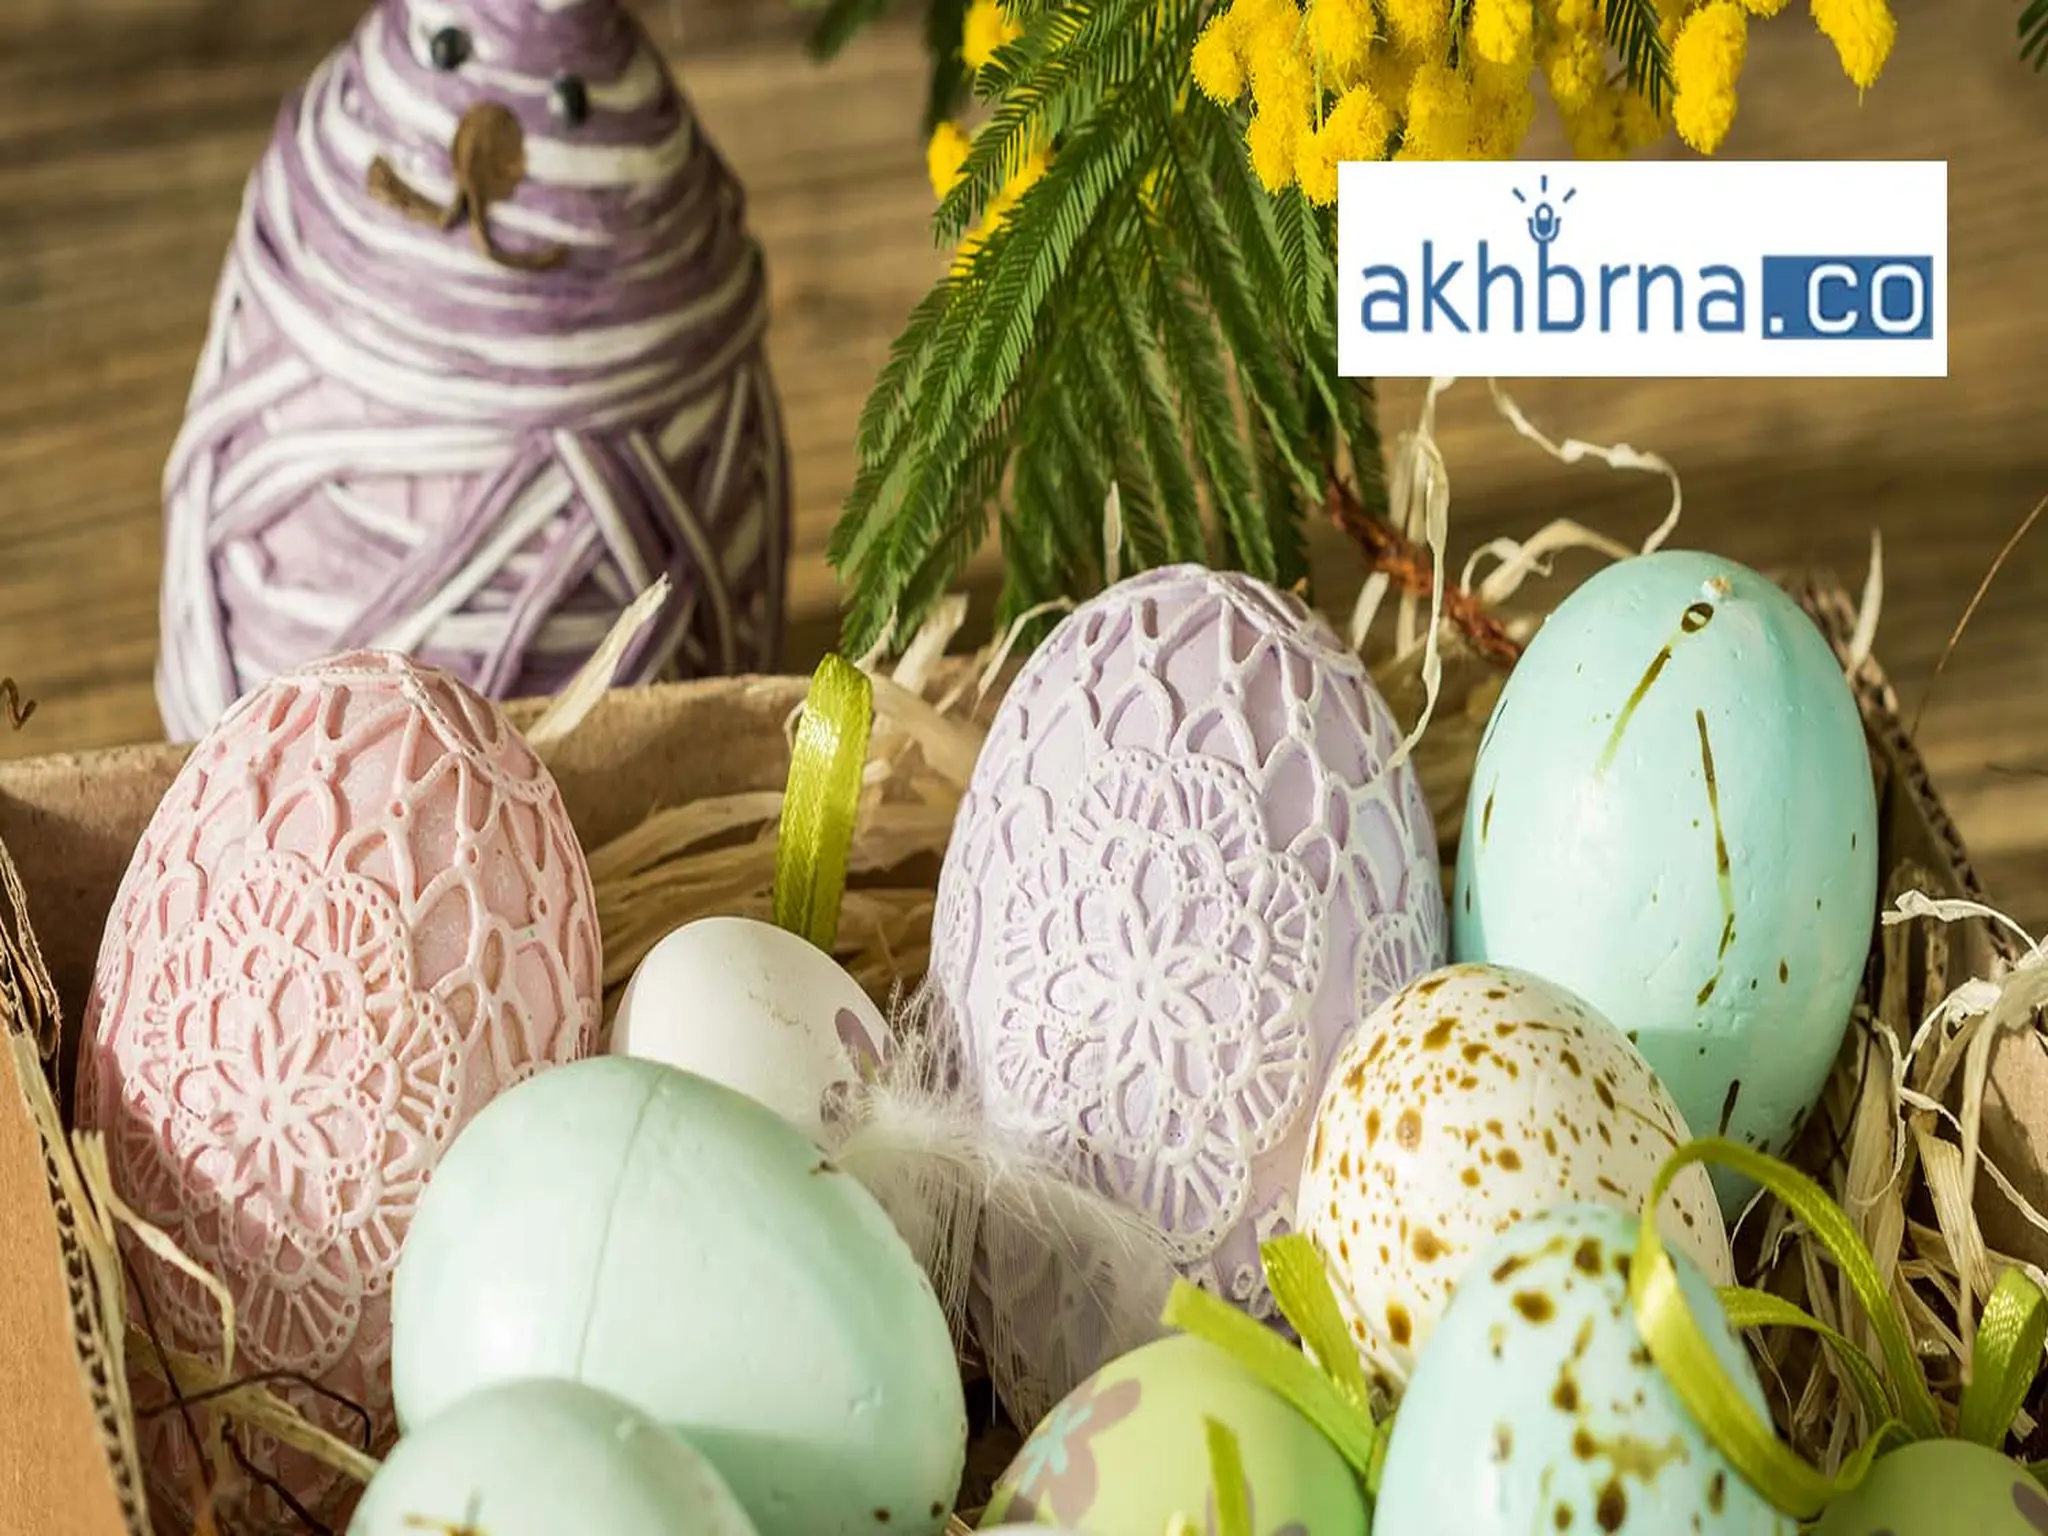 In April, UAE shares an Easter eggstravaganza of Easter treats